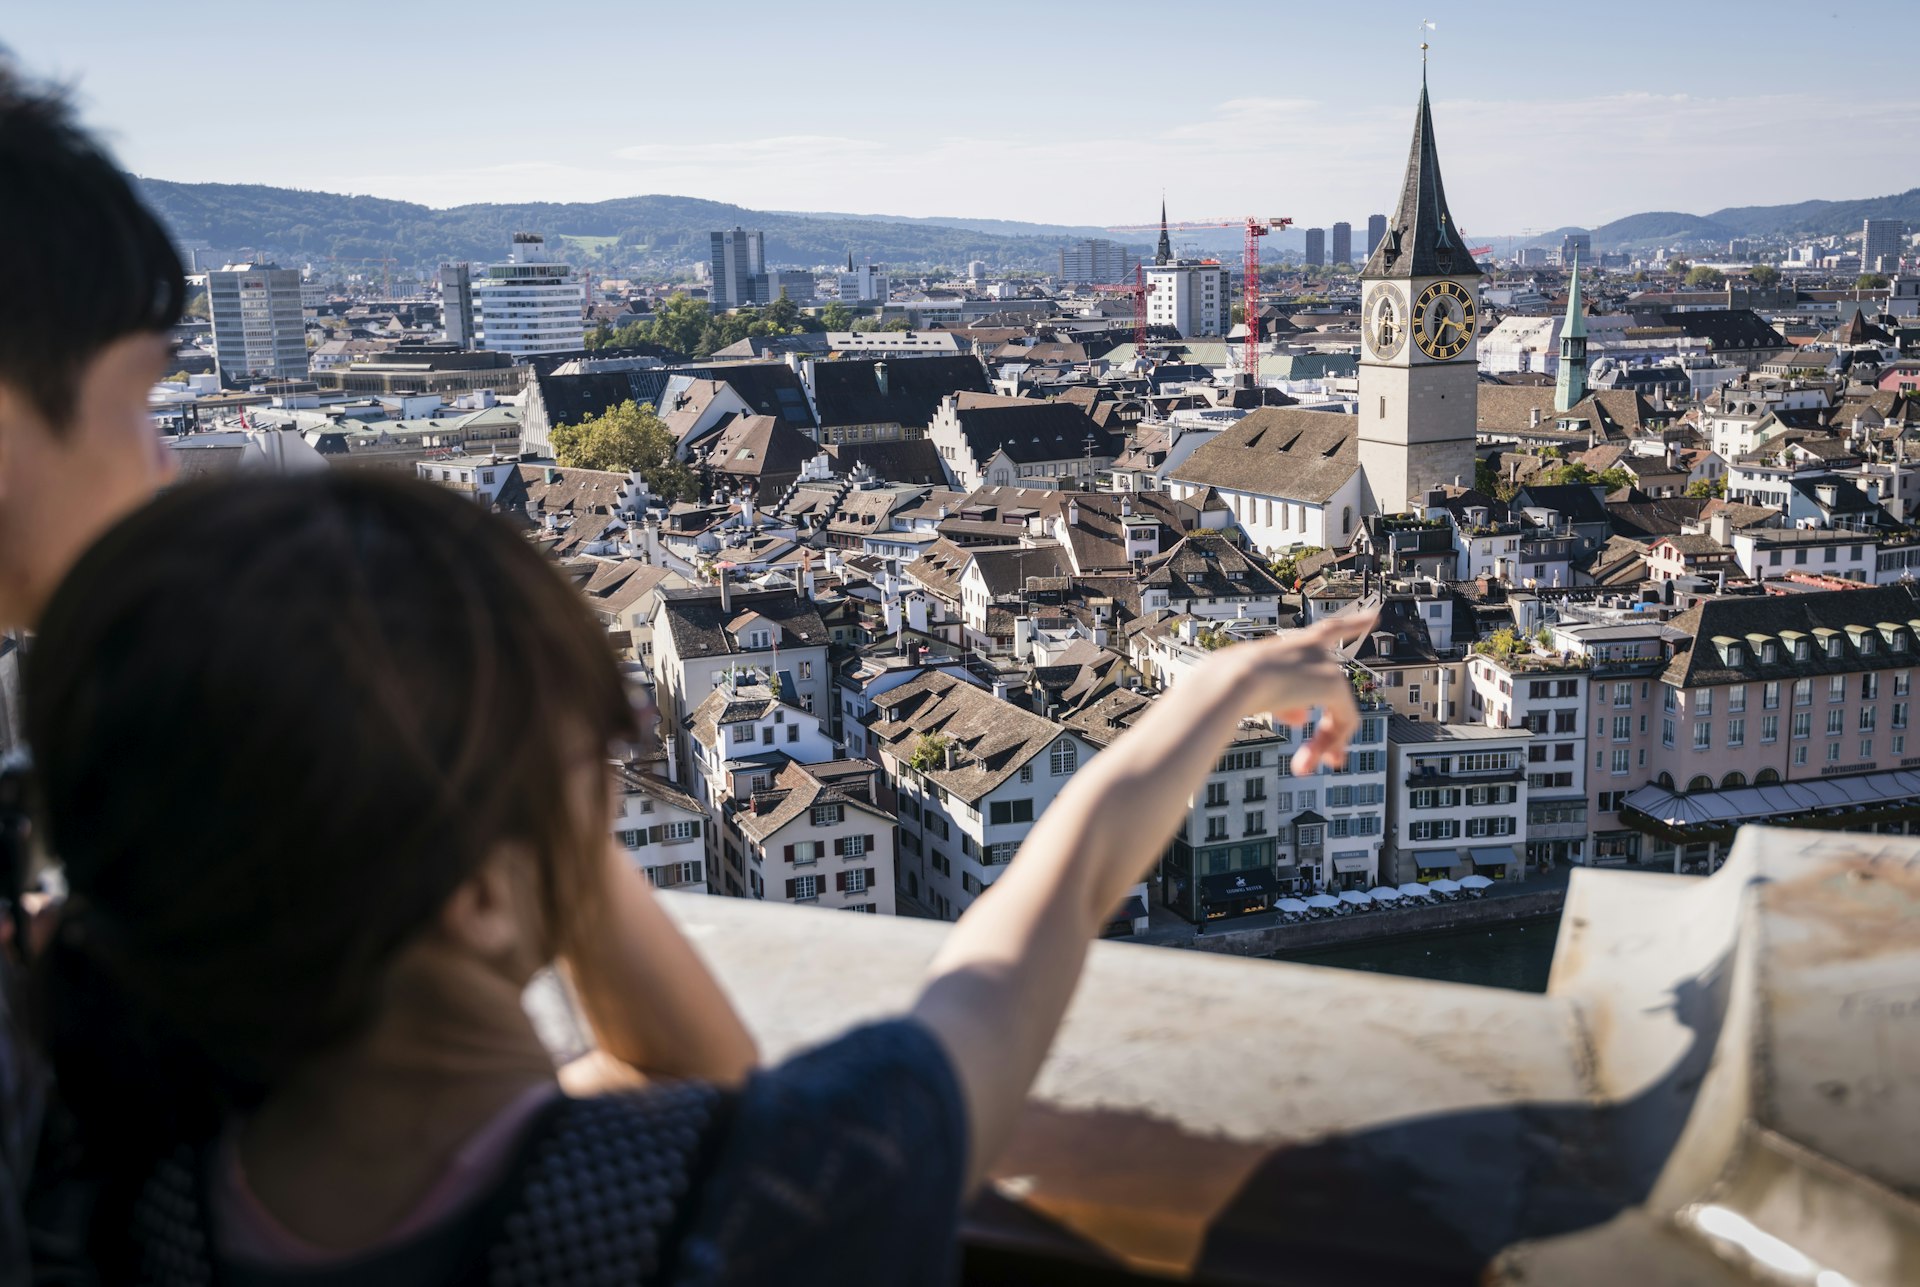 Two tourists are taking a look at Zurich's old town from the observation deck on top of Grossmunster cathedral